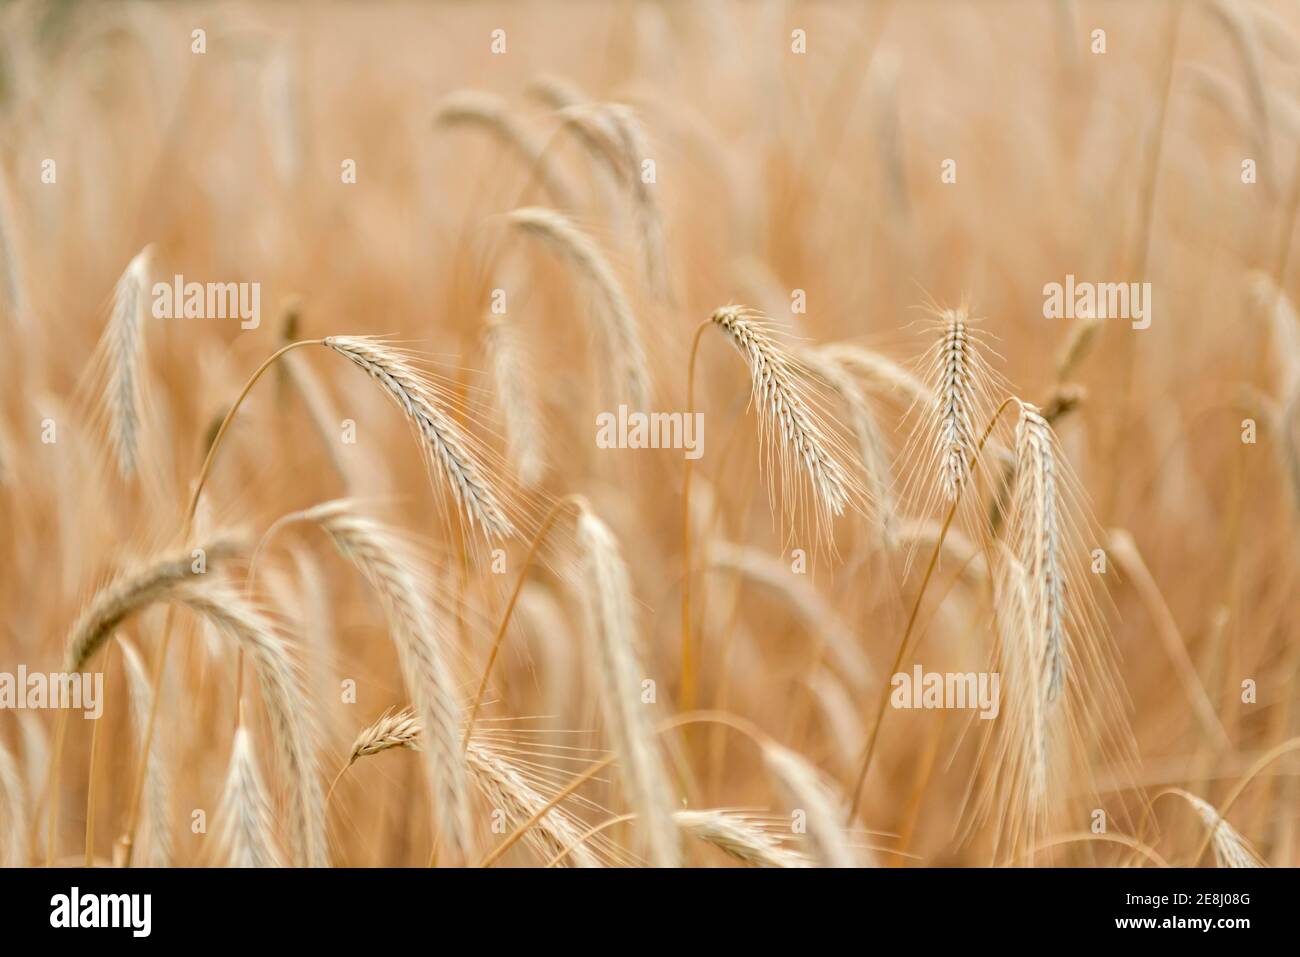 Ears of corn in a field, rye (Secale cereale L.) Petkuser short straw, traditional agricultural cultivation, Open-air museum Domaene Dahlem, Berlin Stock Photo